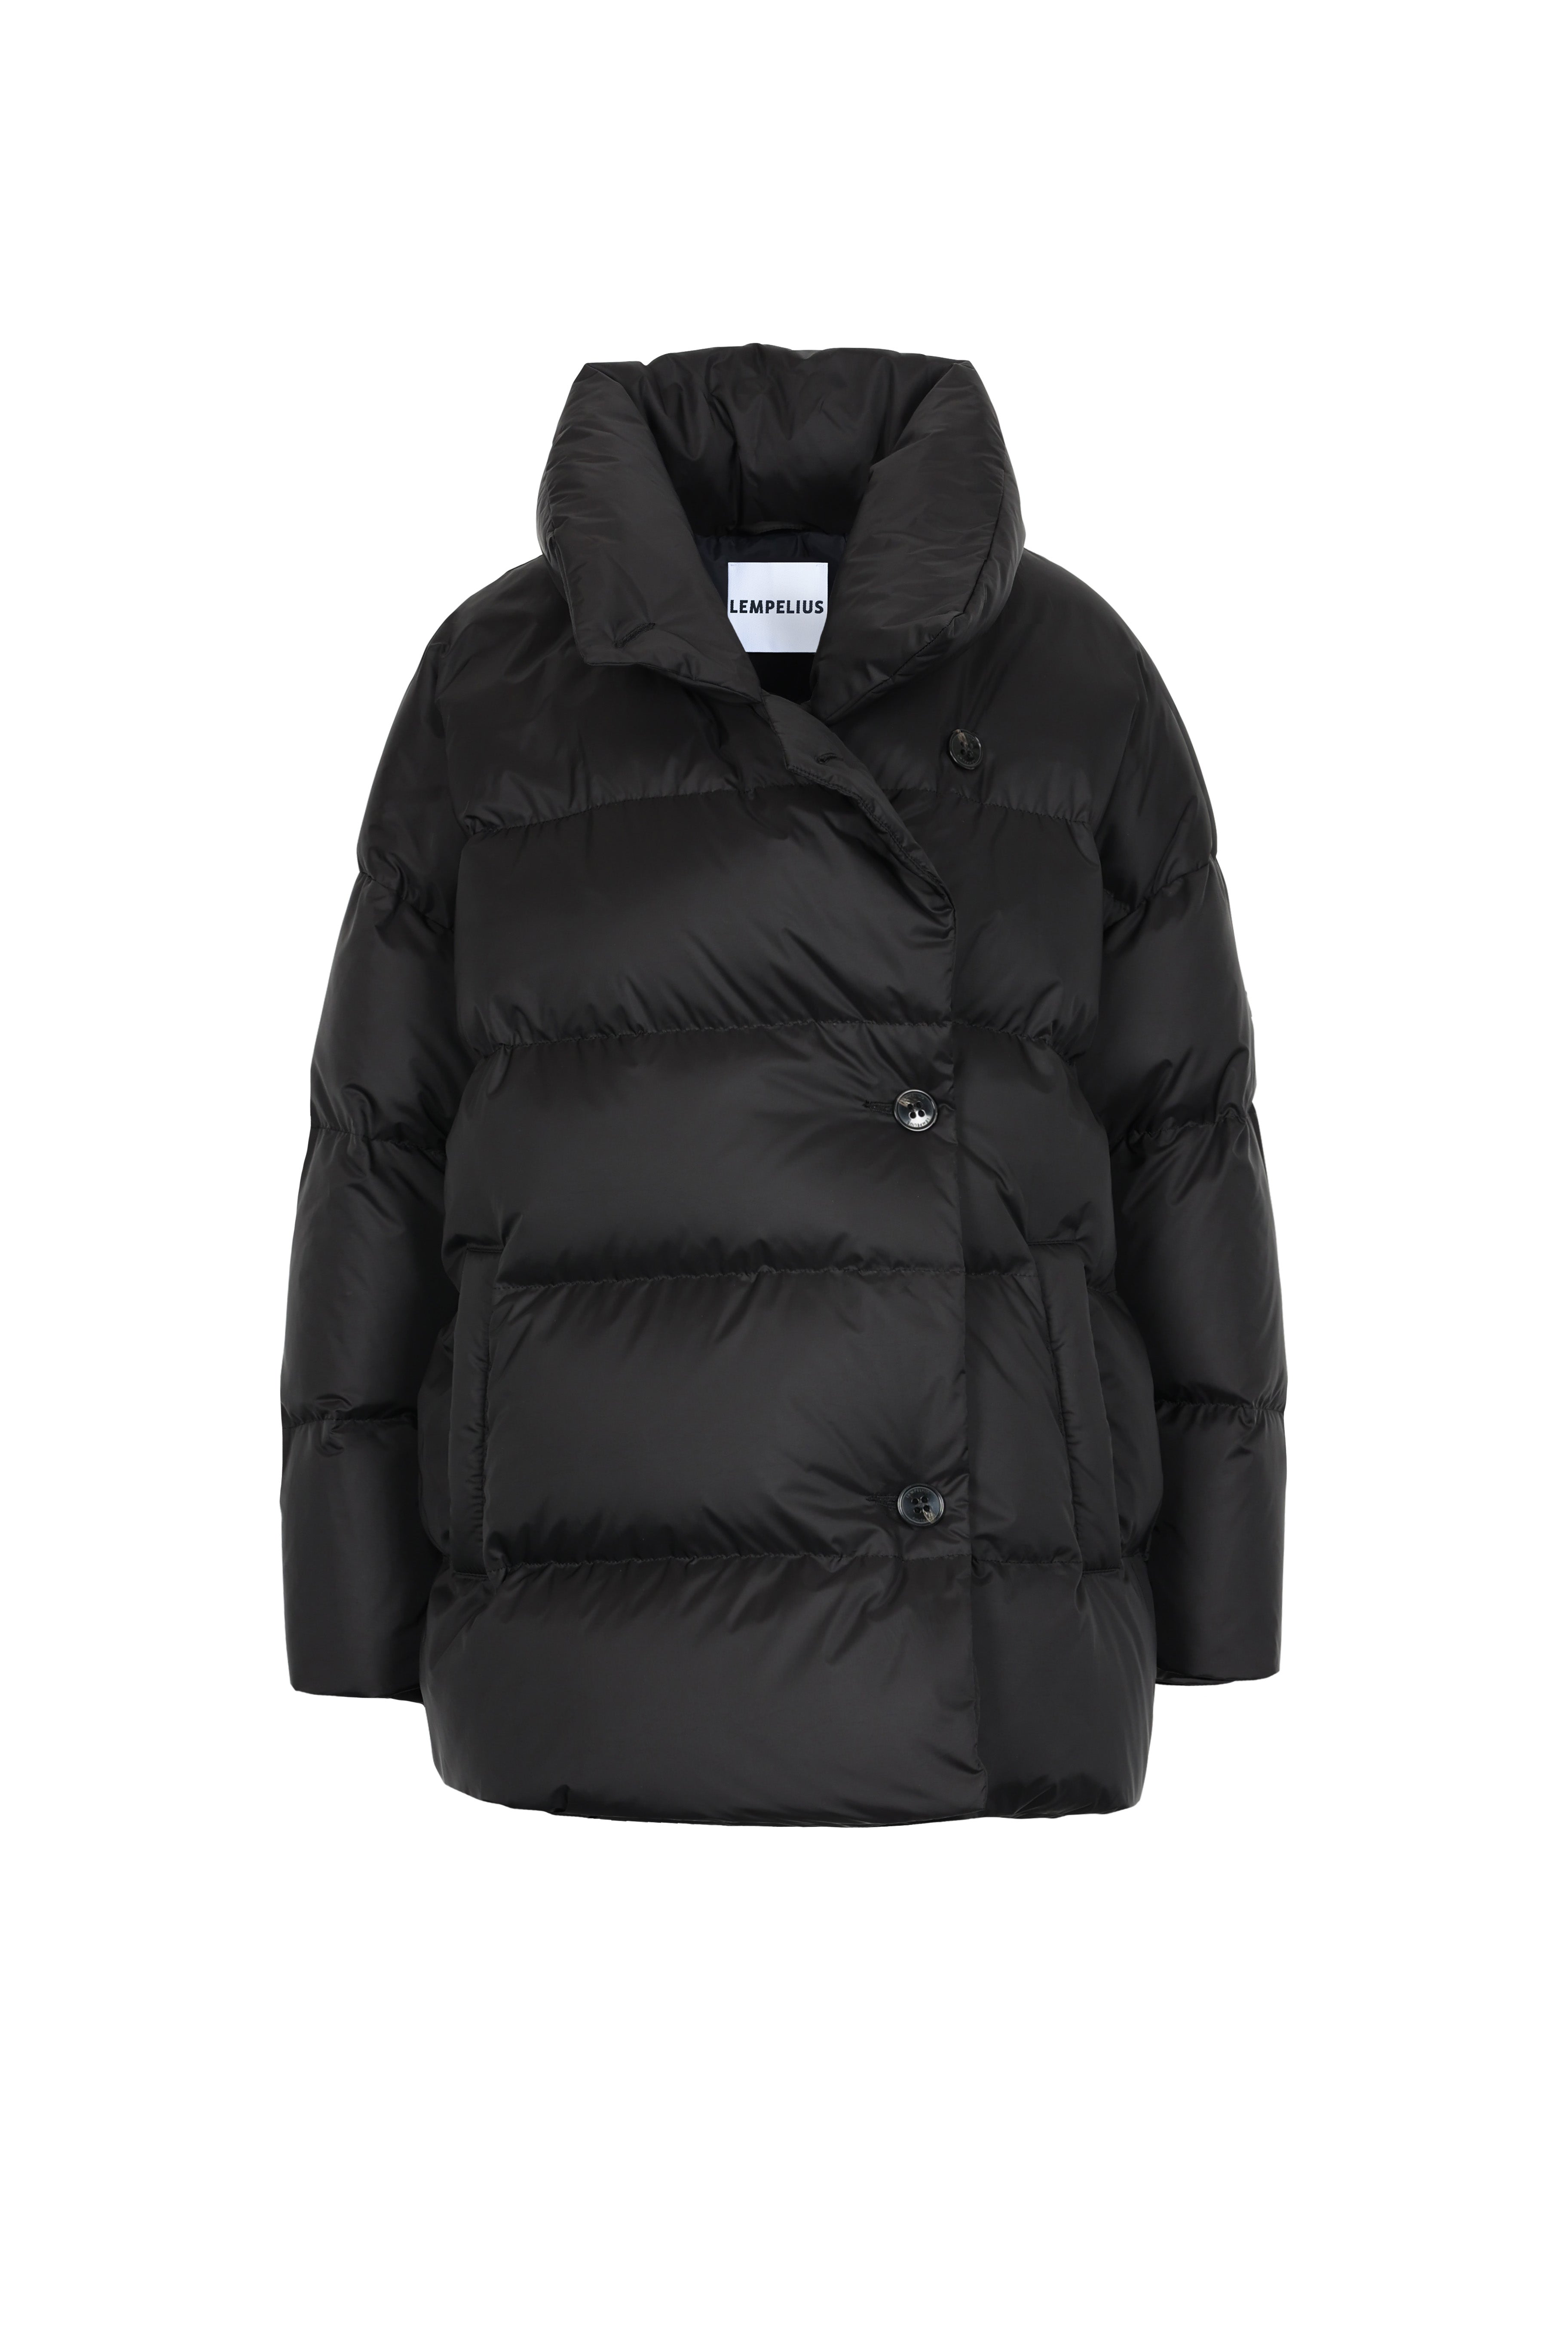 short quilted Lempelius down jacket in color black